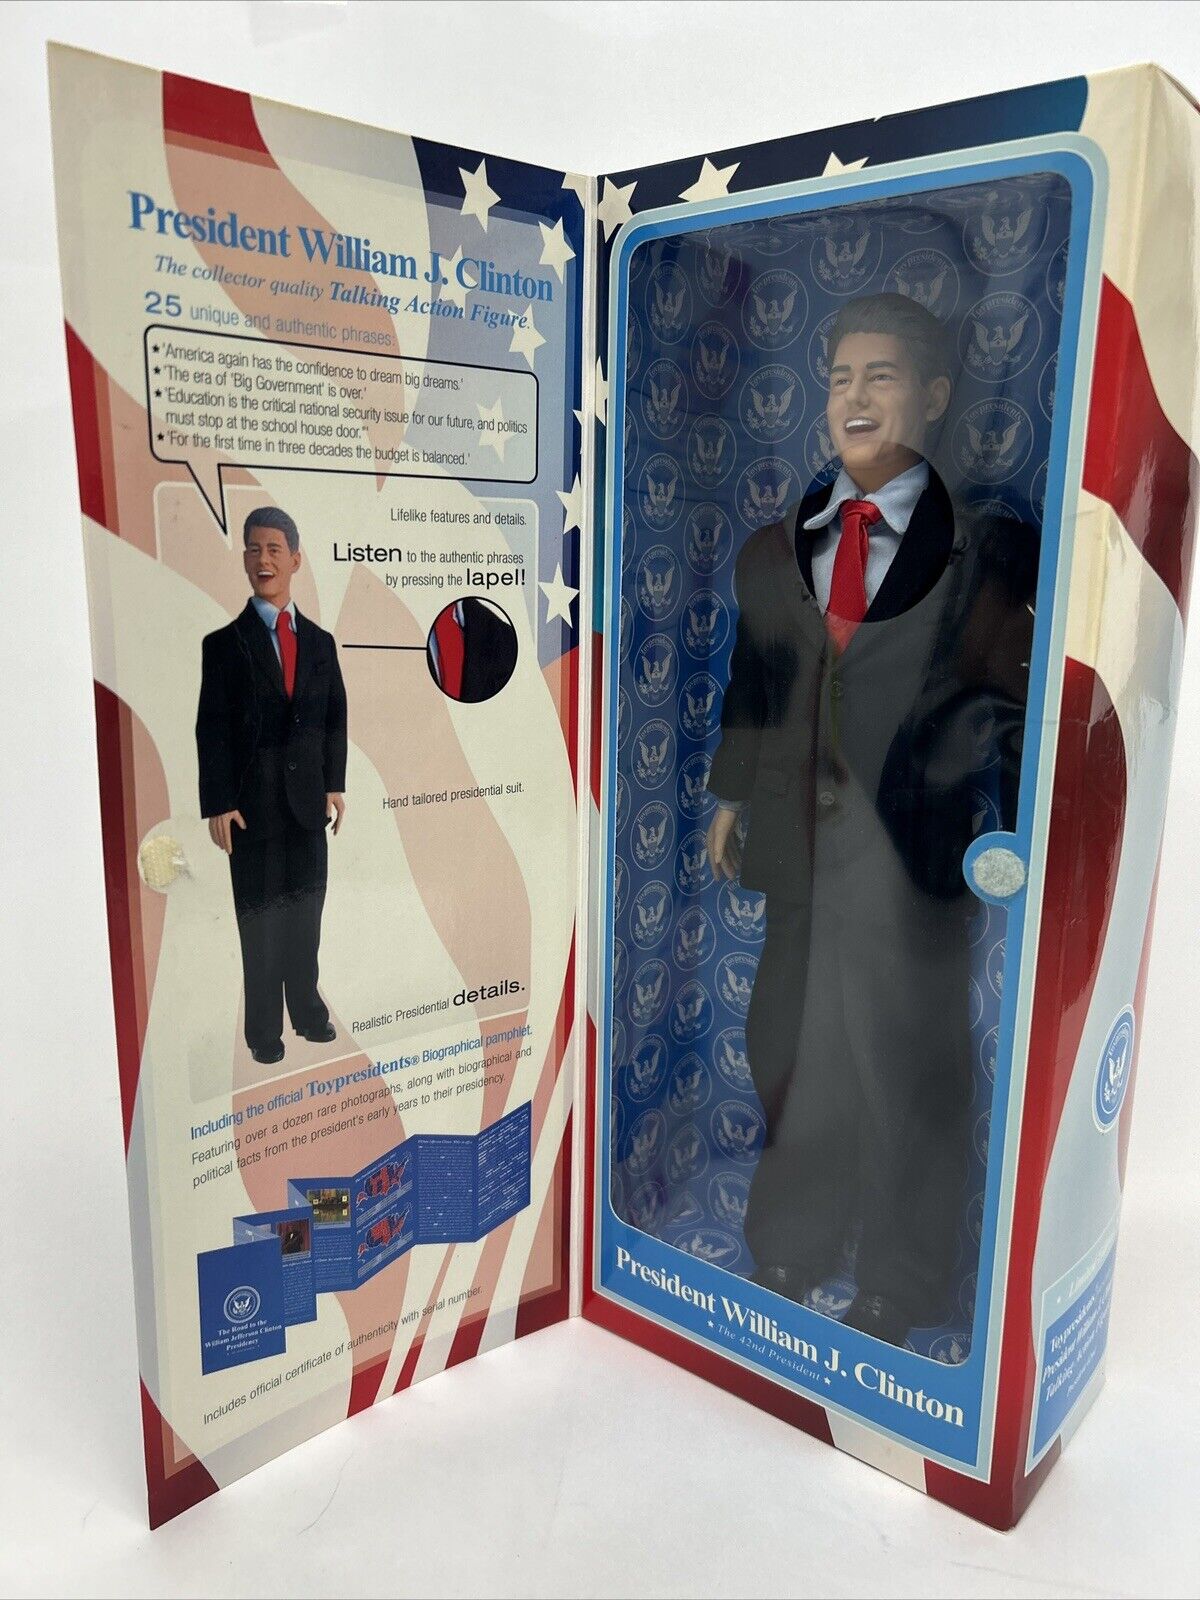 Talking Action Figure President Clinton By Toypresidents *New Batteries - Works*